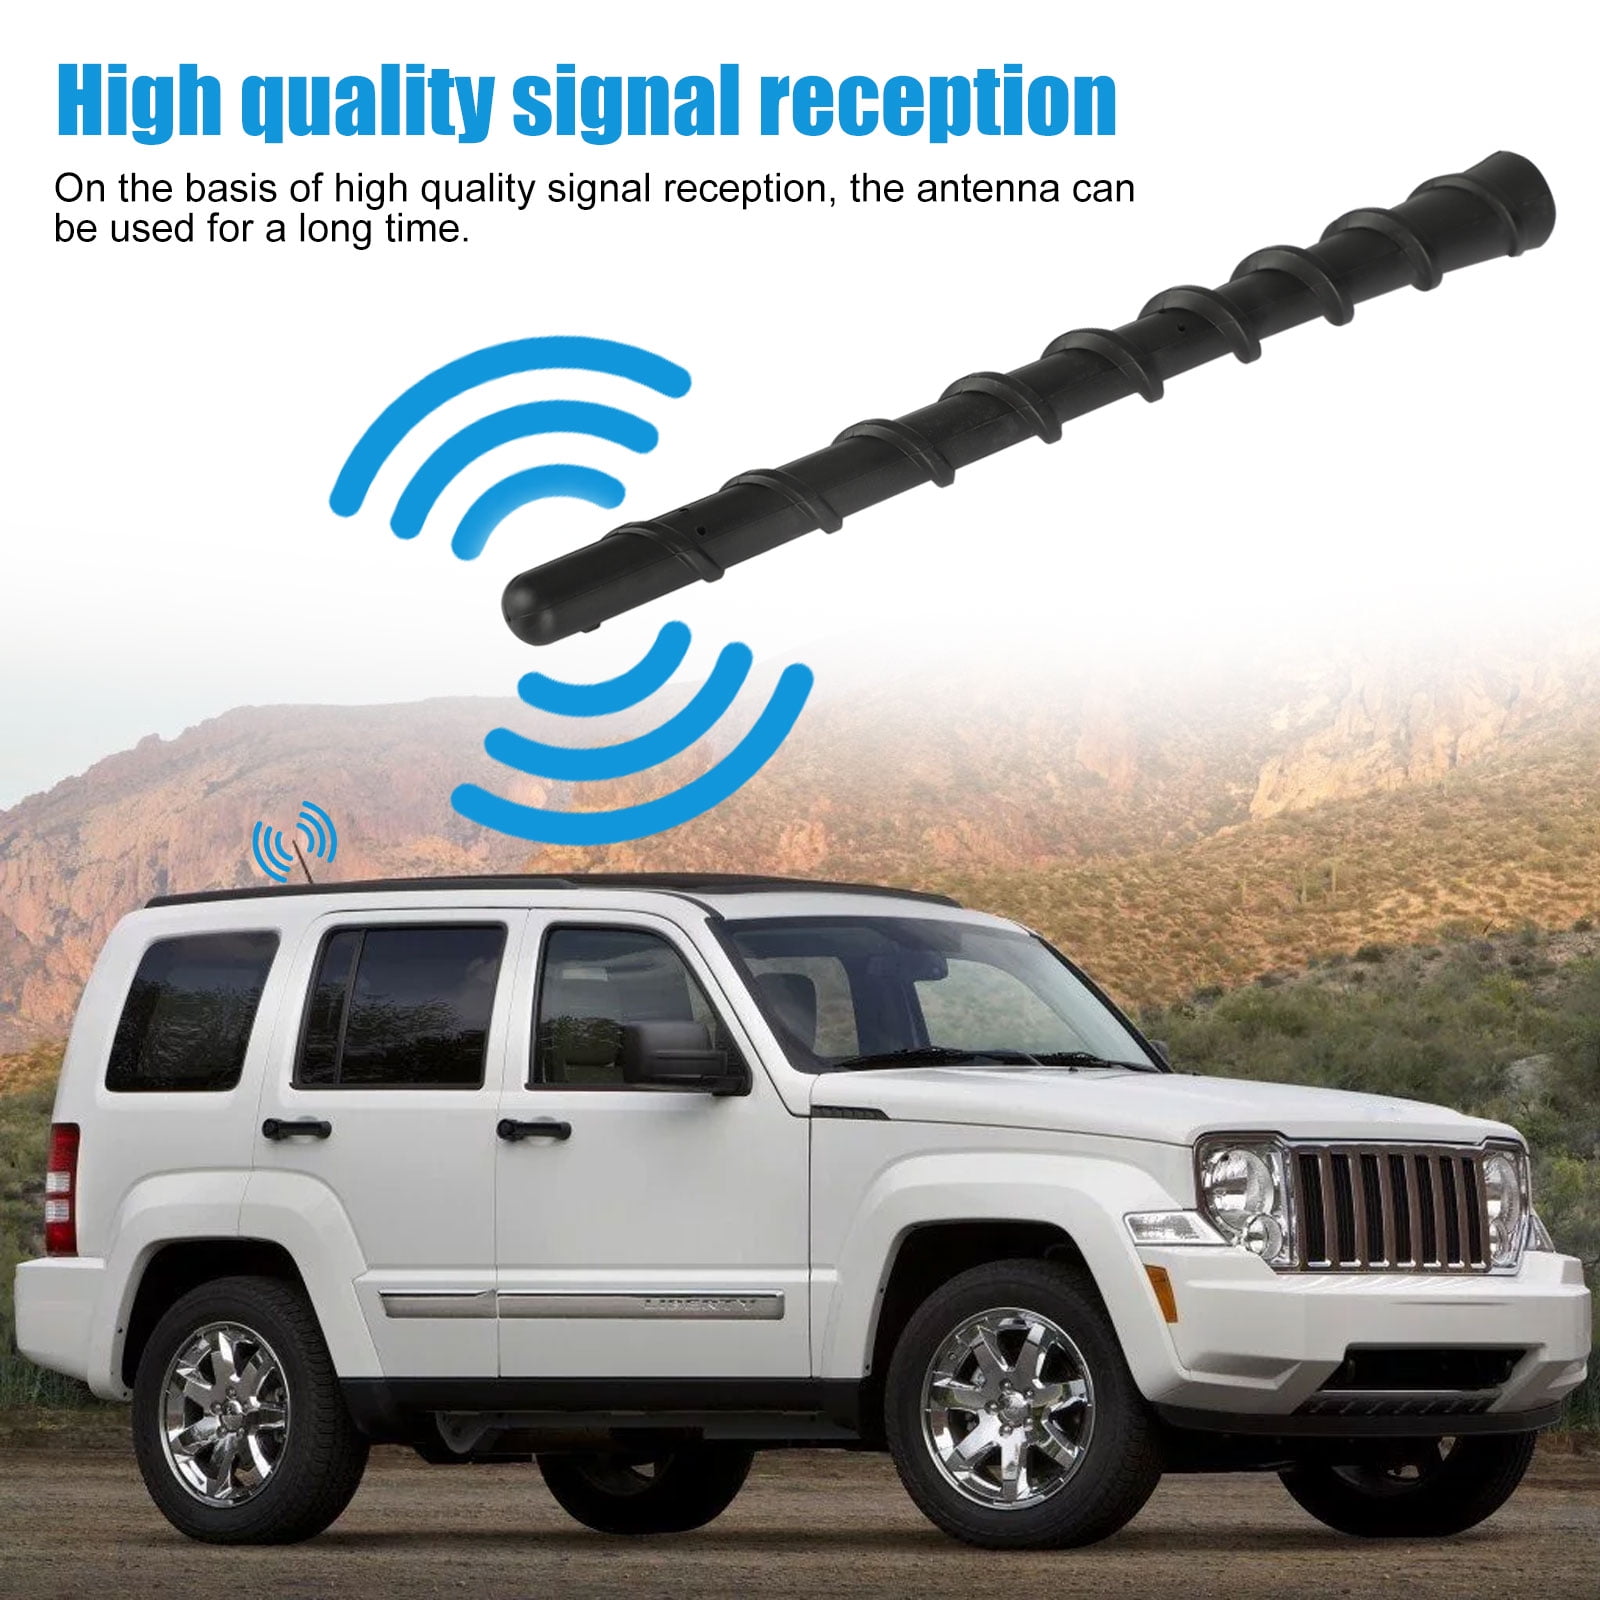 Black DeepRoar Replacement Antenna for Jeep Liberty 2011-2012 4 Inch BA01 Optimized FM/AM Reception 